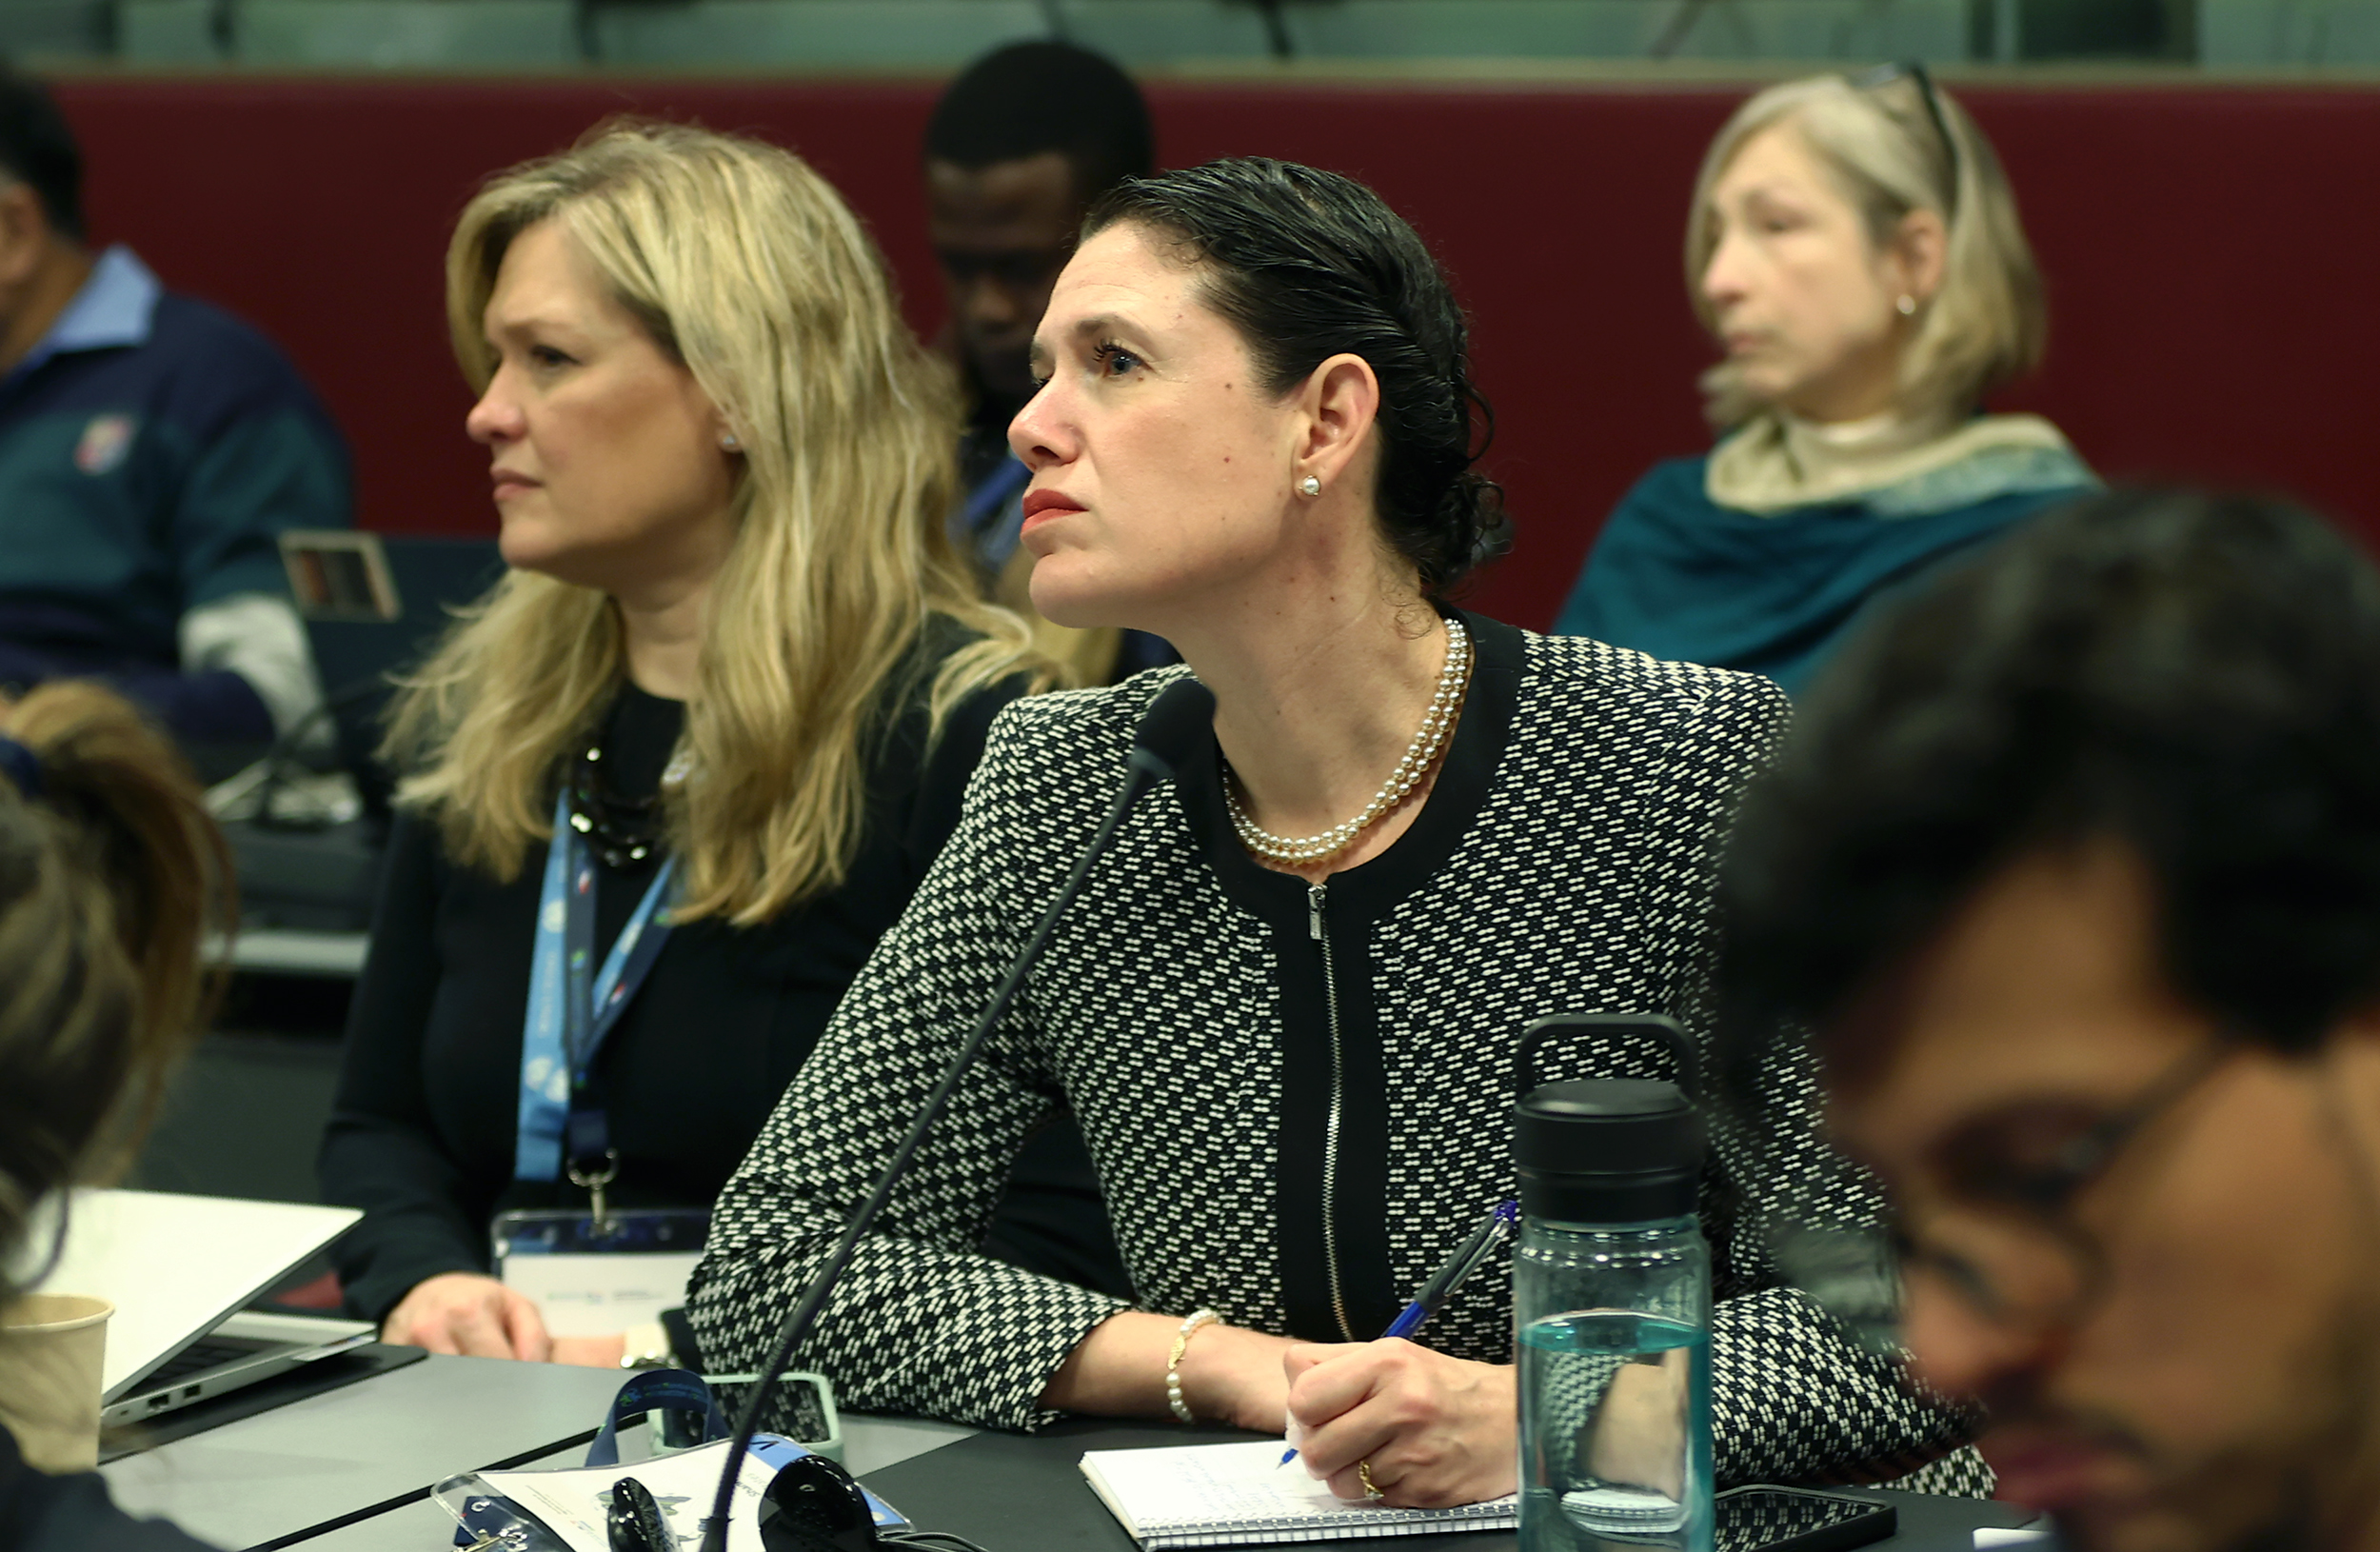 A woman with dark hair wearing a black and white jacket listens intently during a panel discussion.